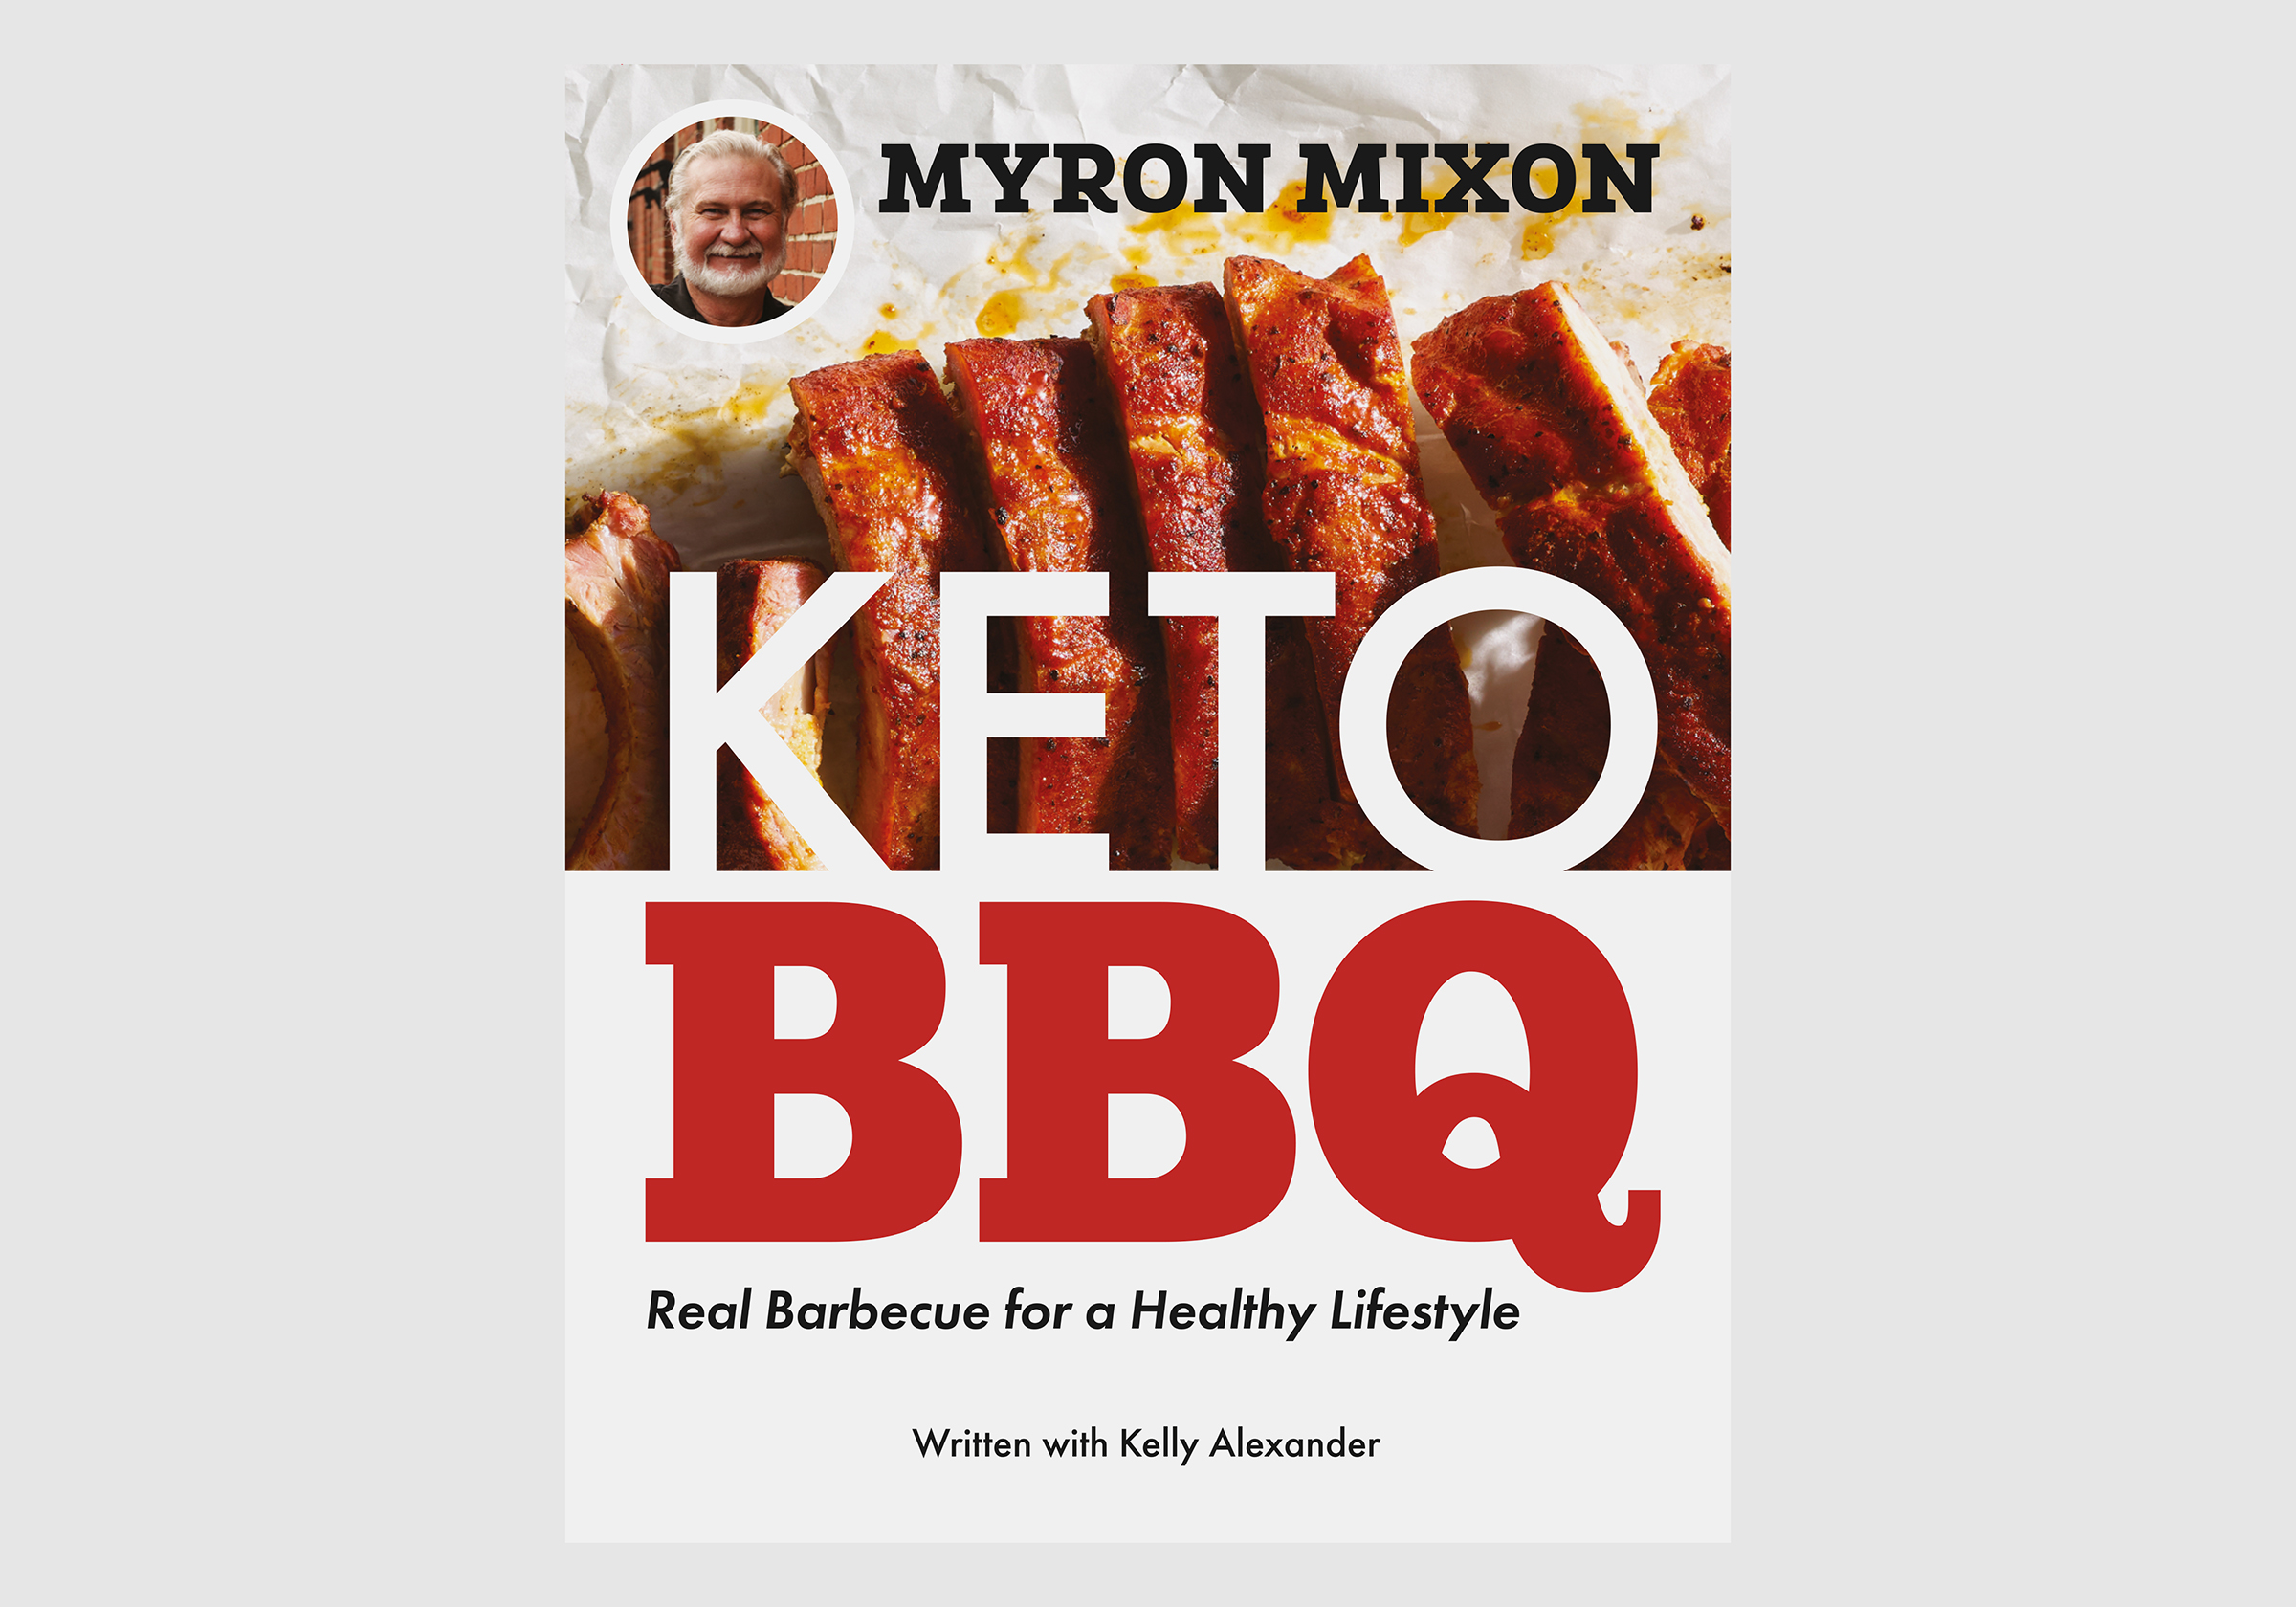 Myron Mixon's "Keto BBQ: Real Barbecue for a Healthy Lifestyle" is a thick book about slimming down